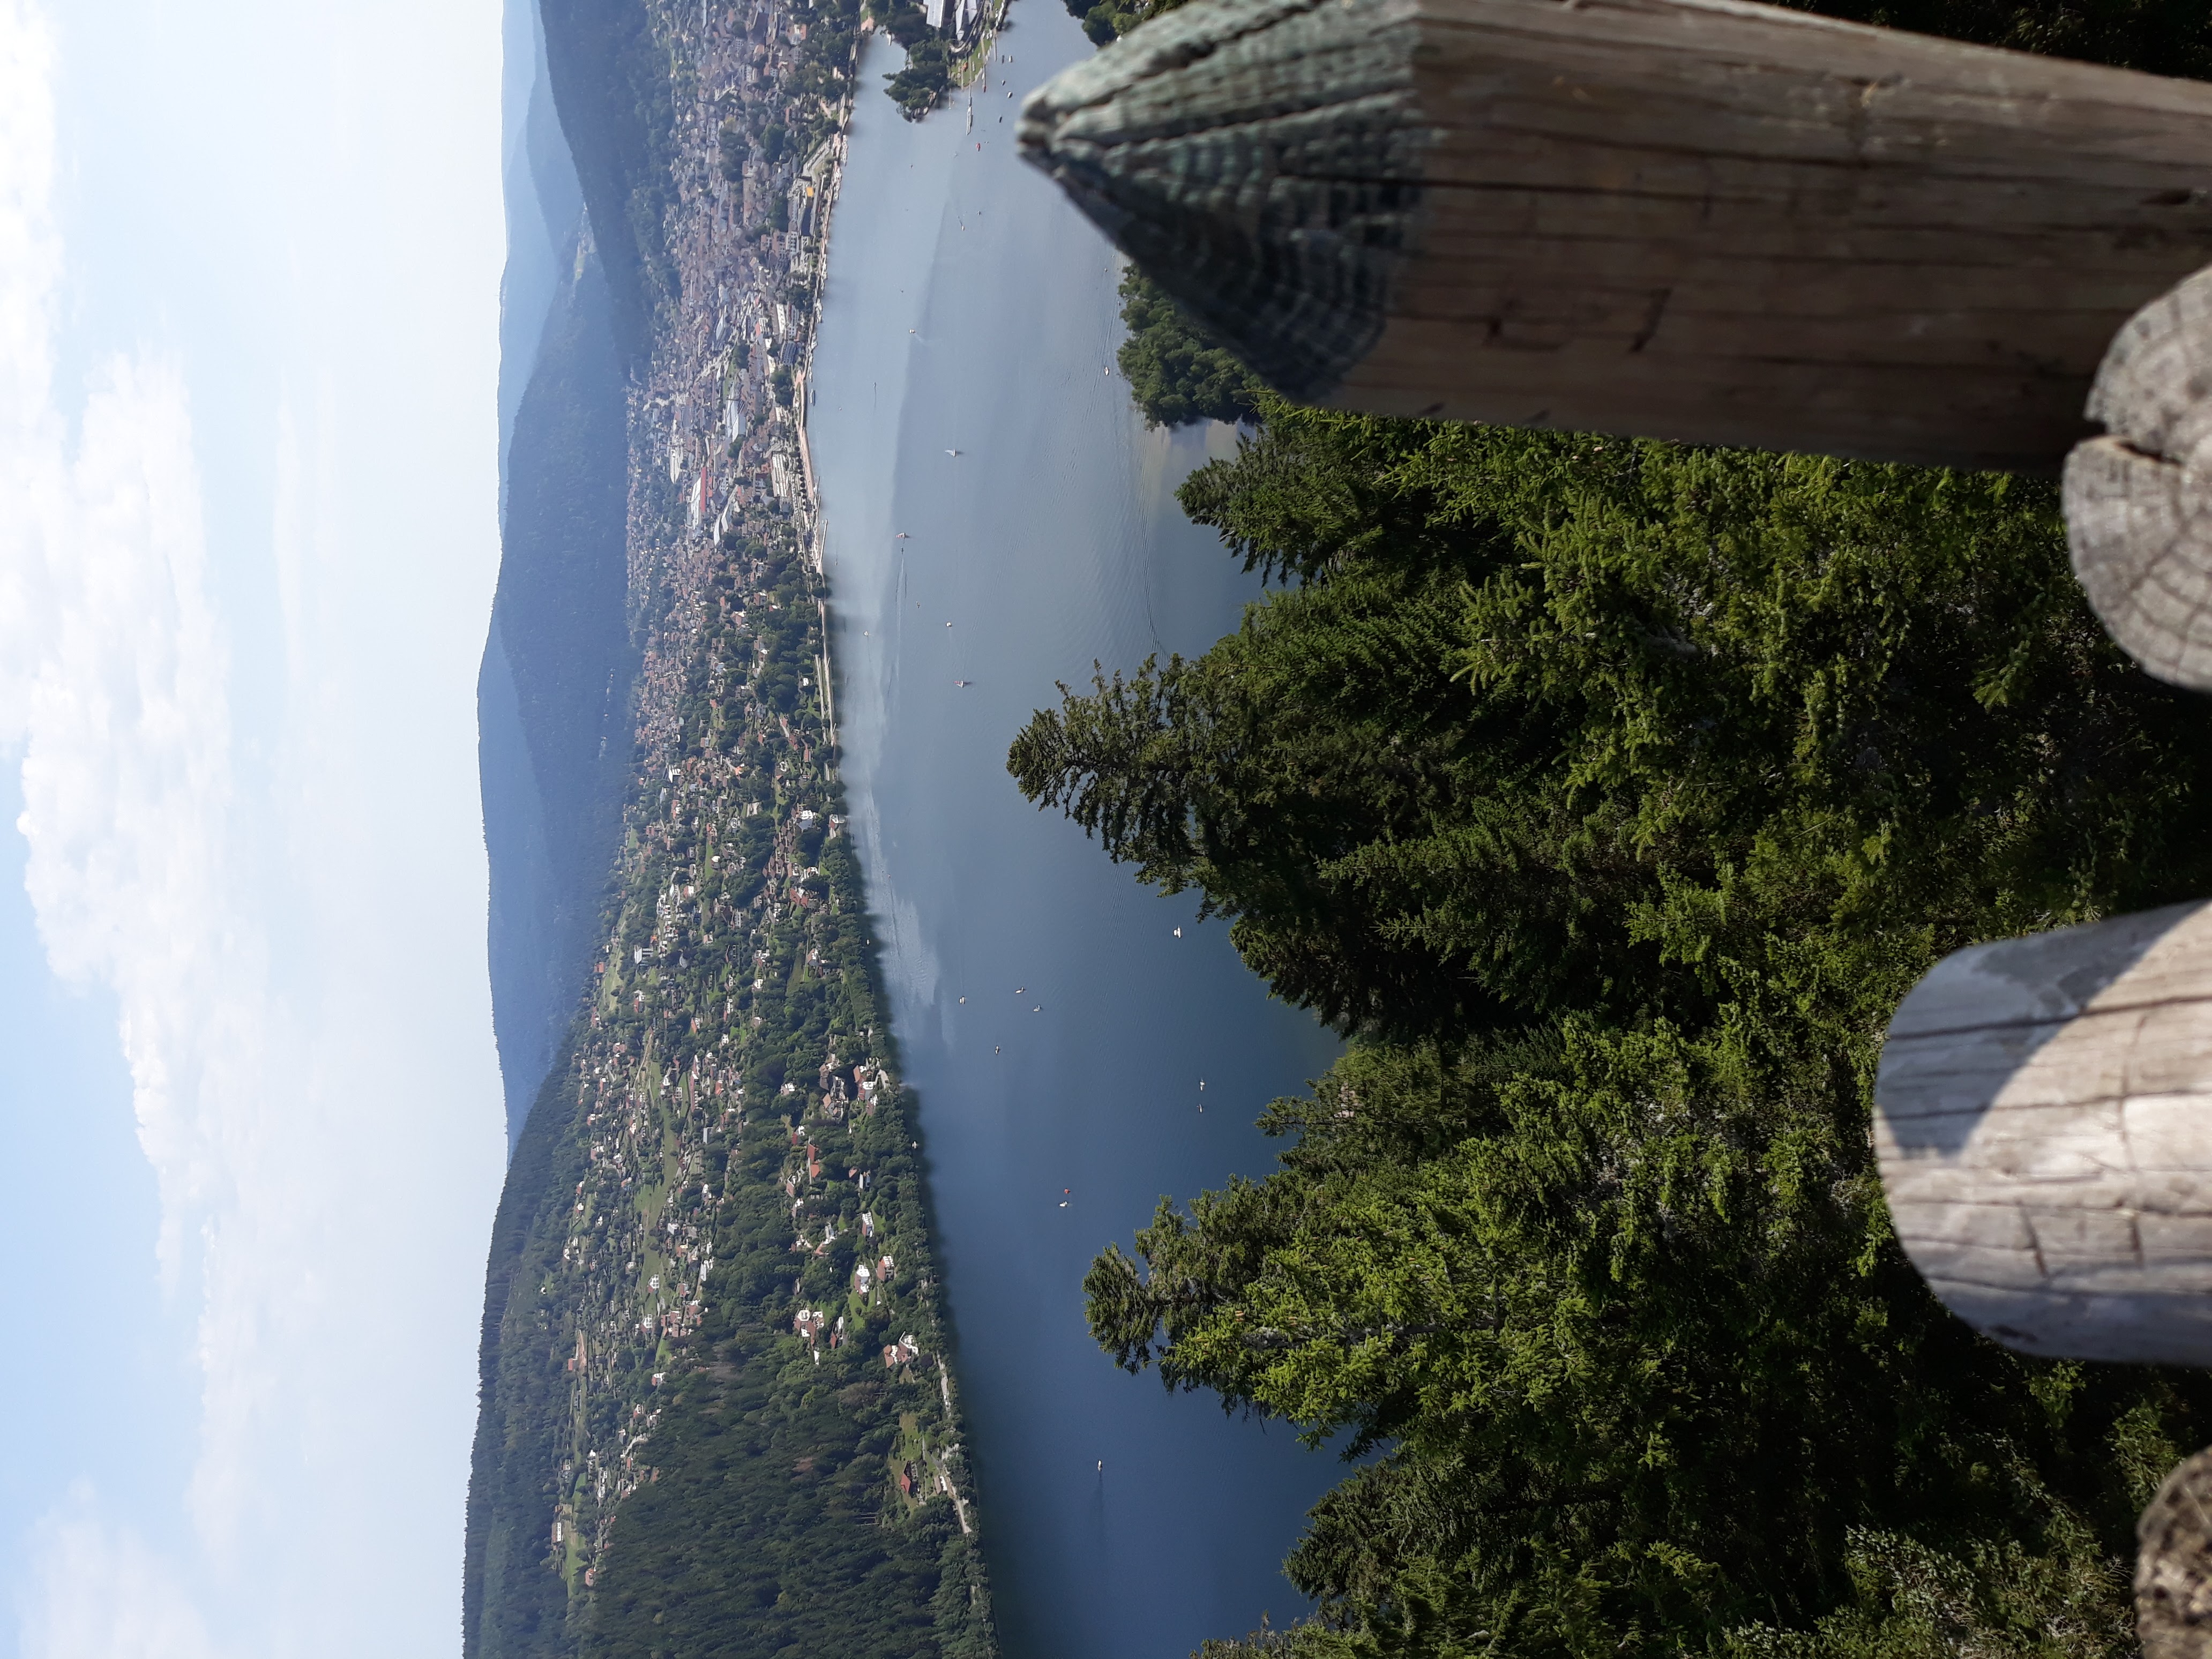 Gérardmer’s lake seen from the top of Mérelle’s tower